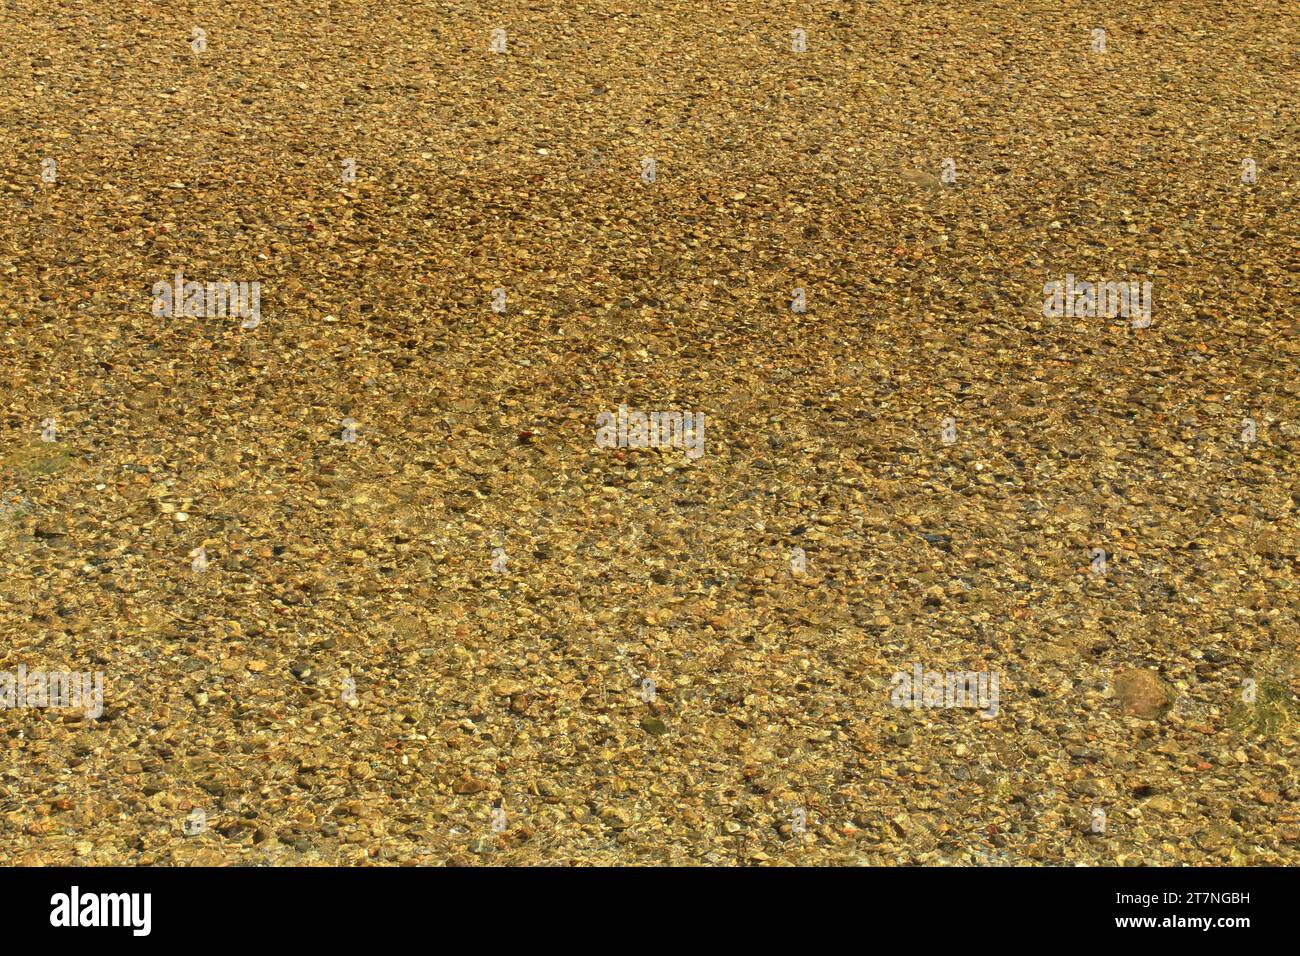 River rock texture background pattern Stock Photo